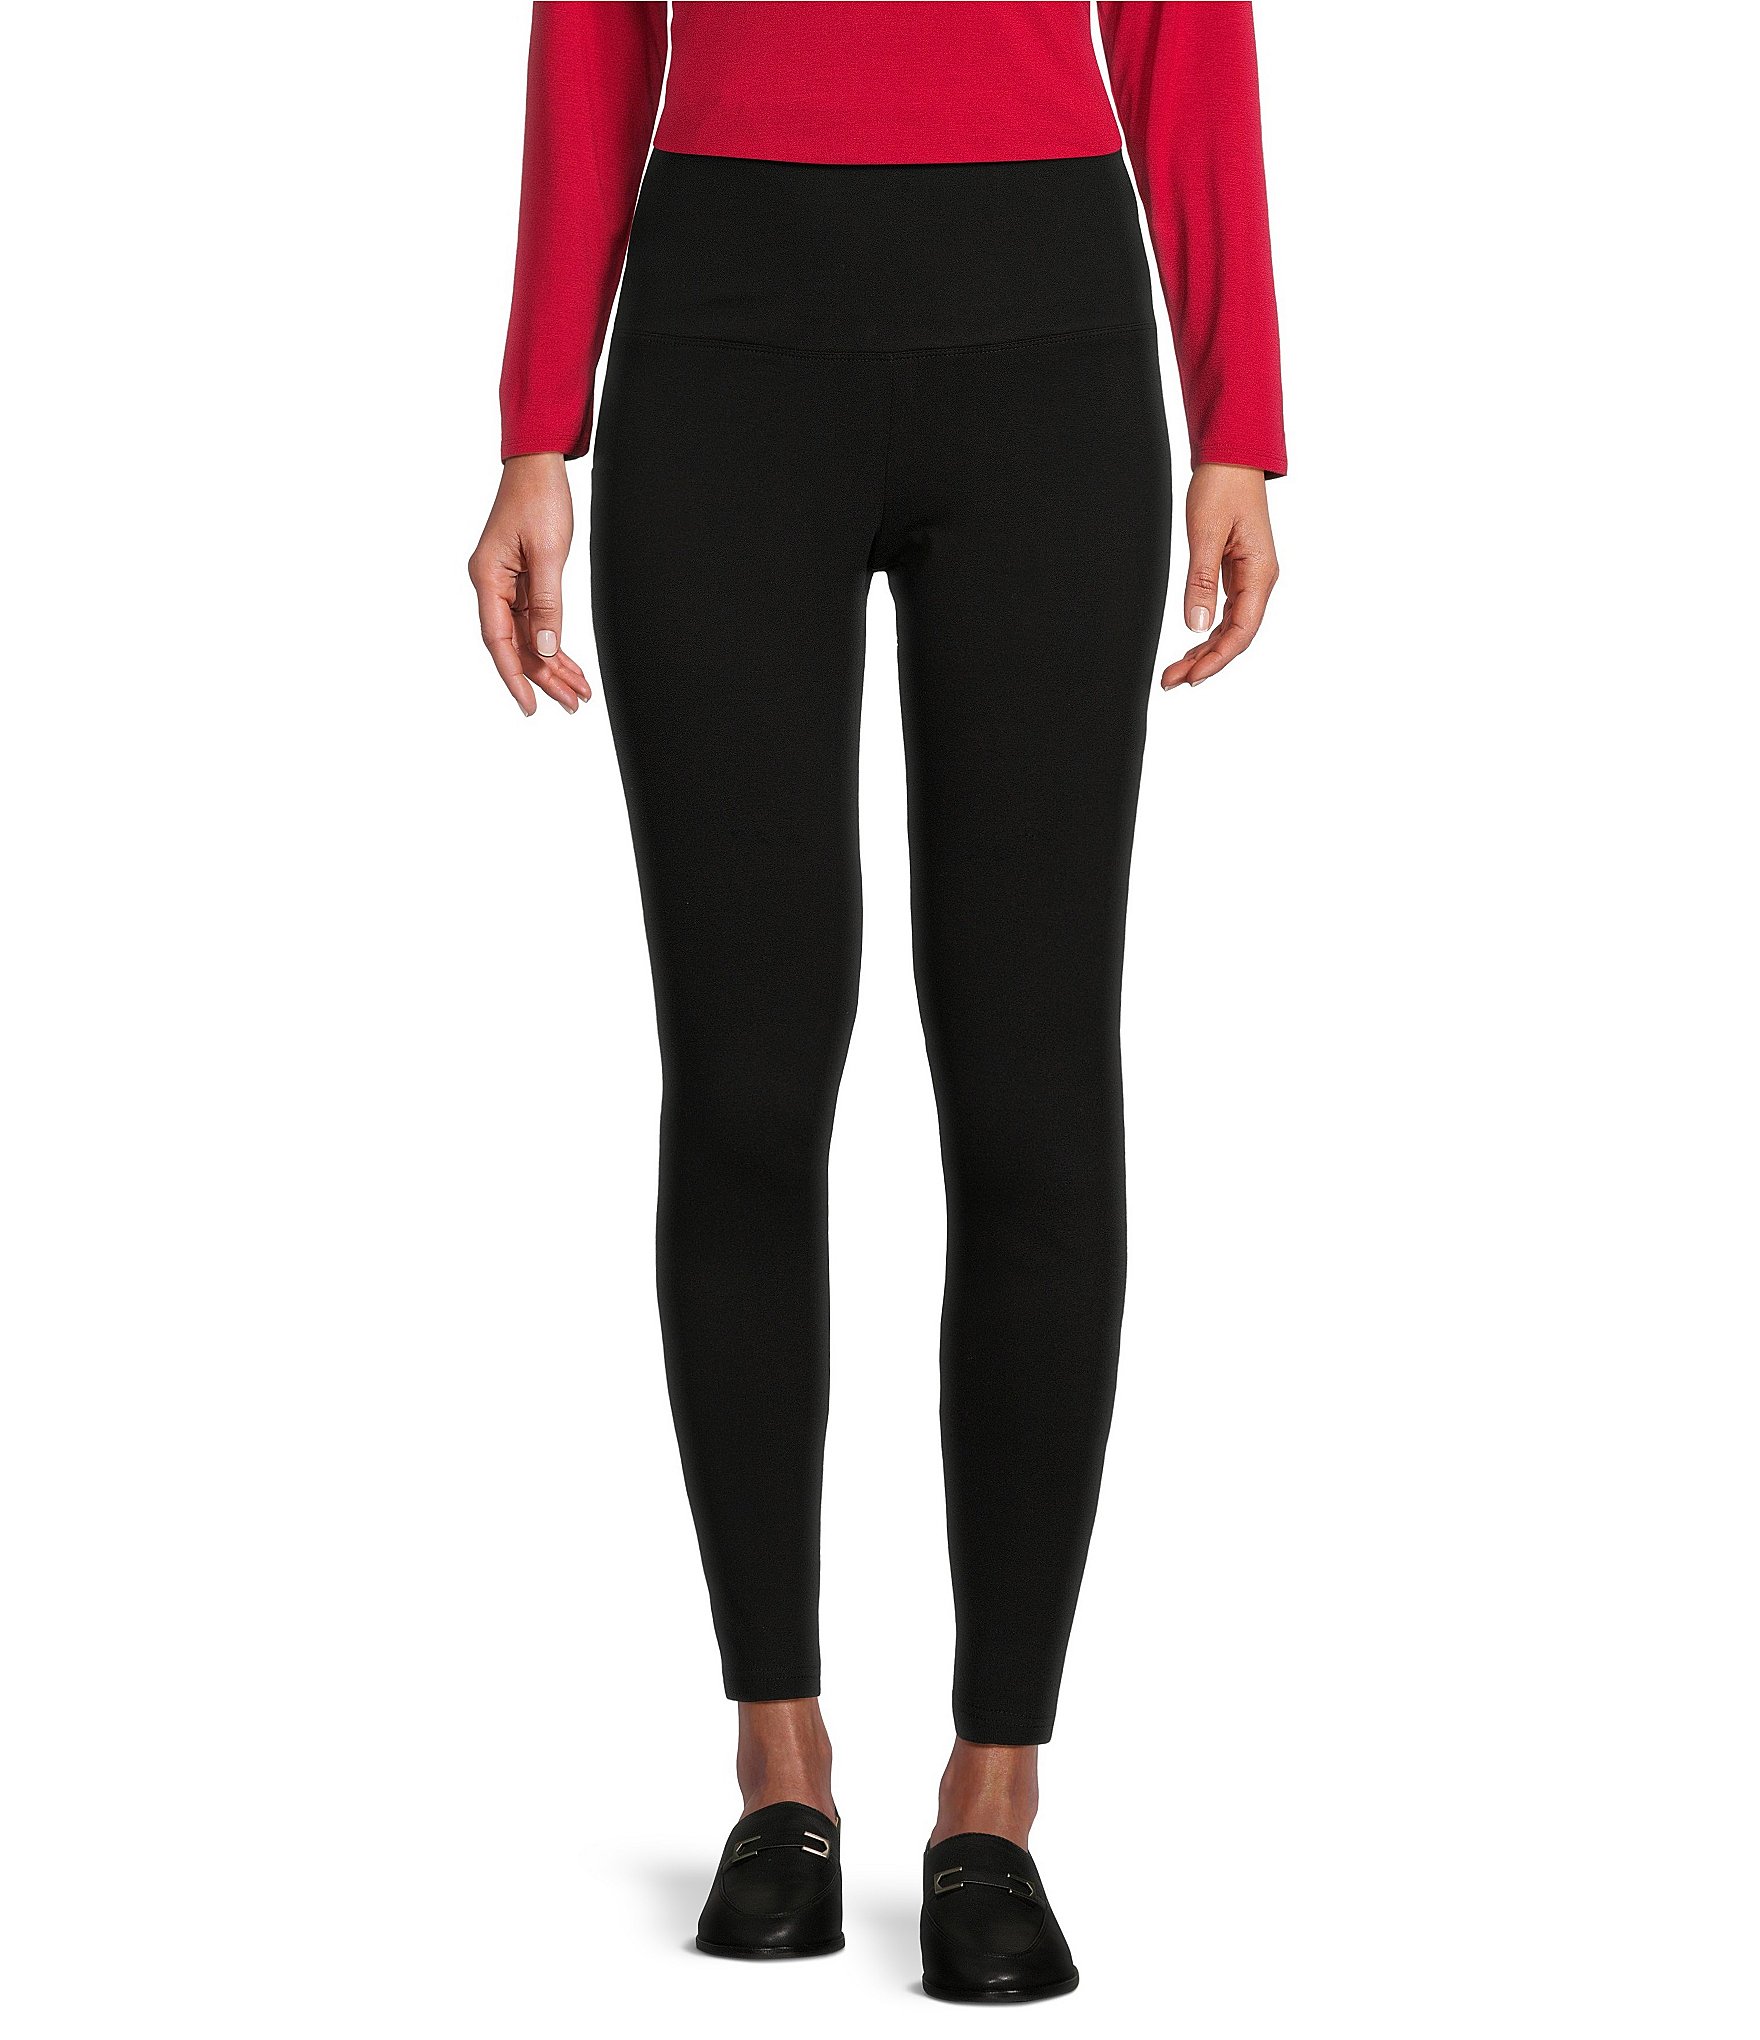 Organic Cotton + Spandex Leggings - Intouch Clothing